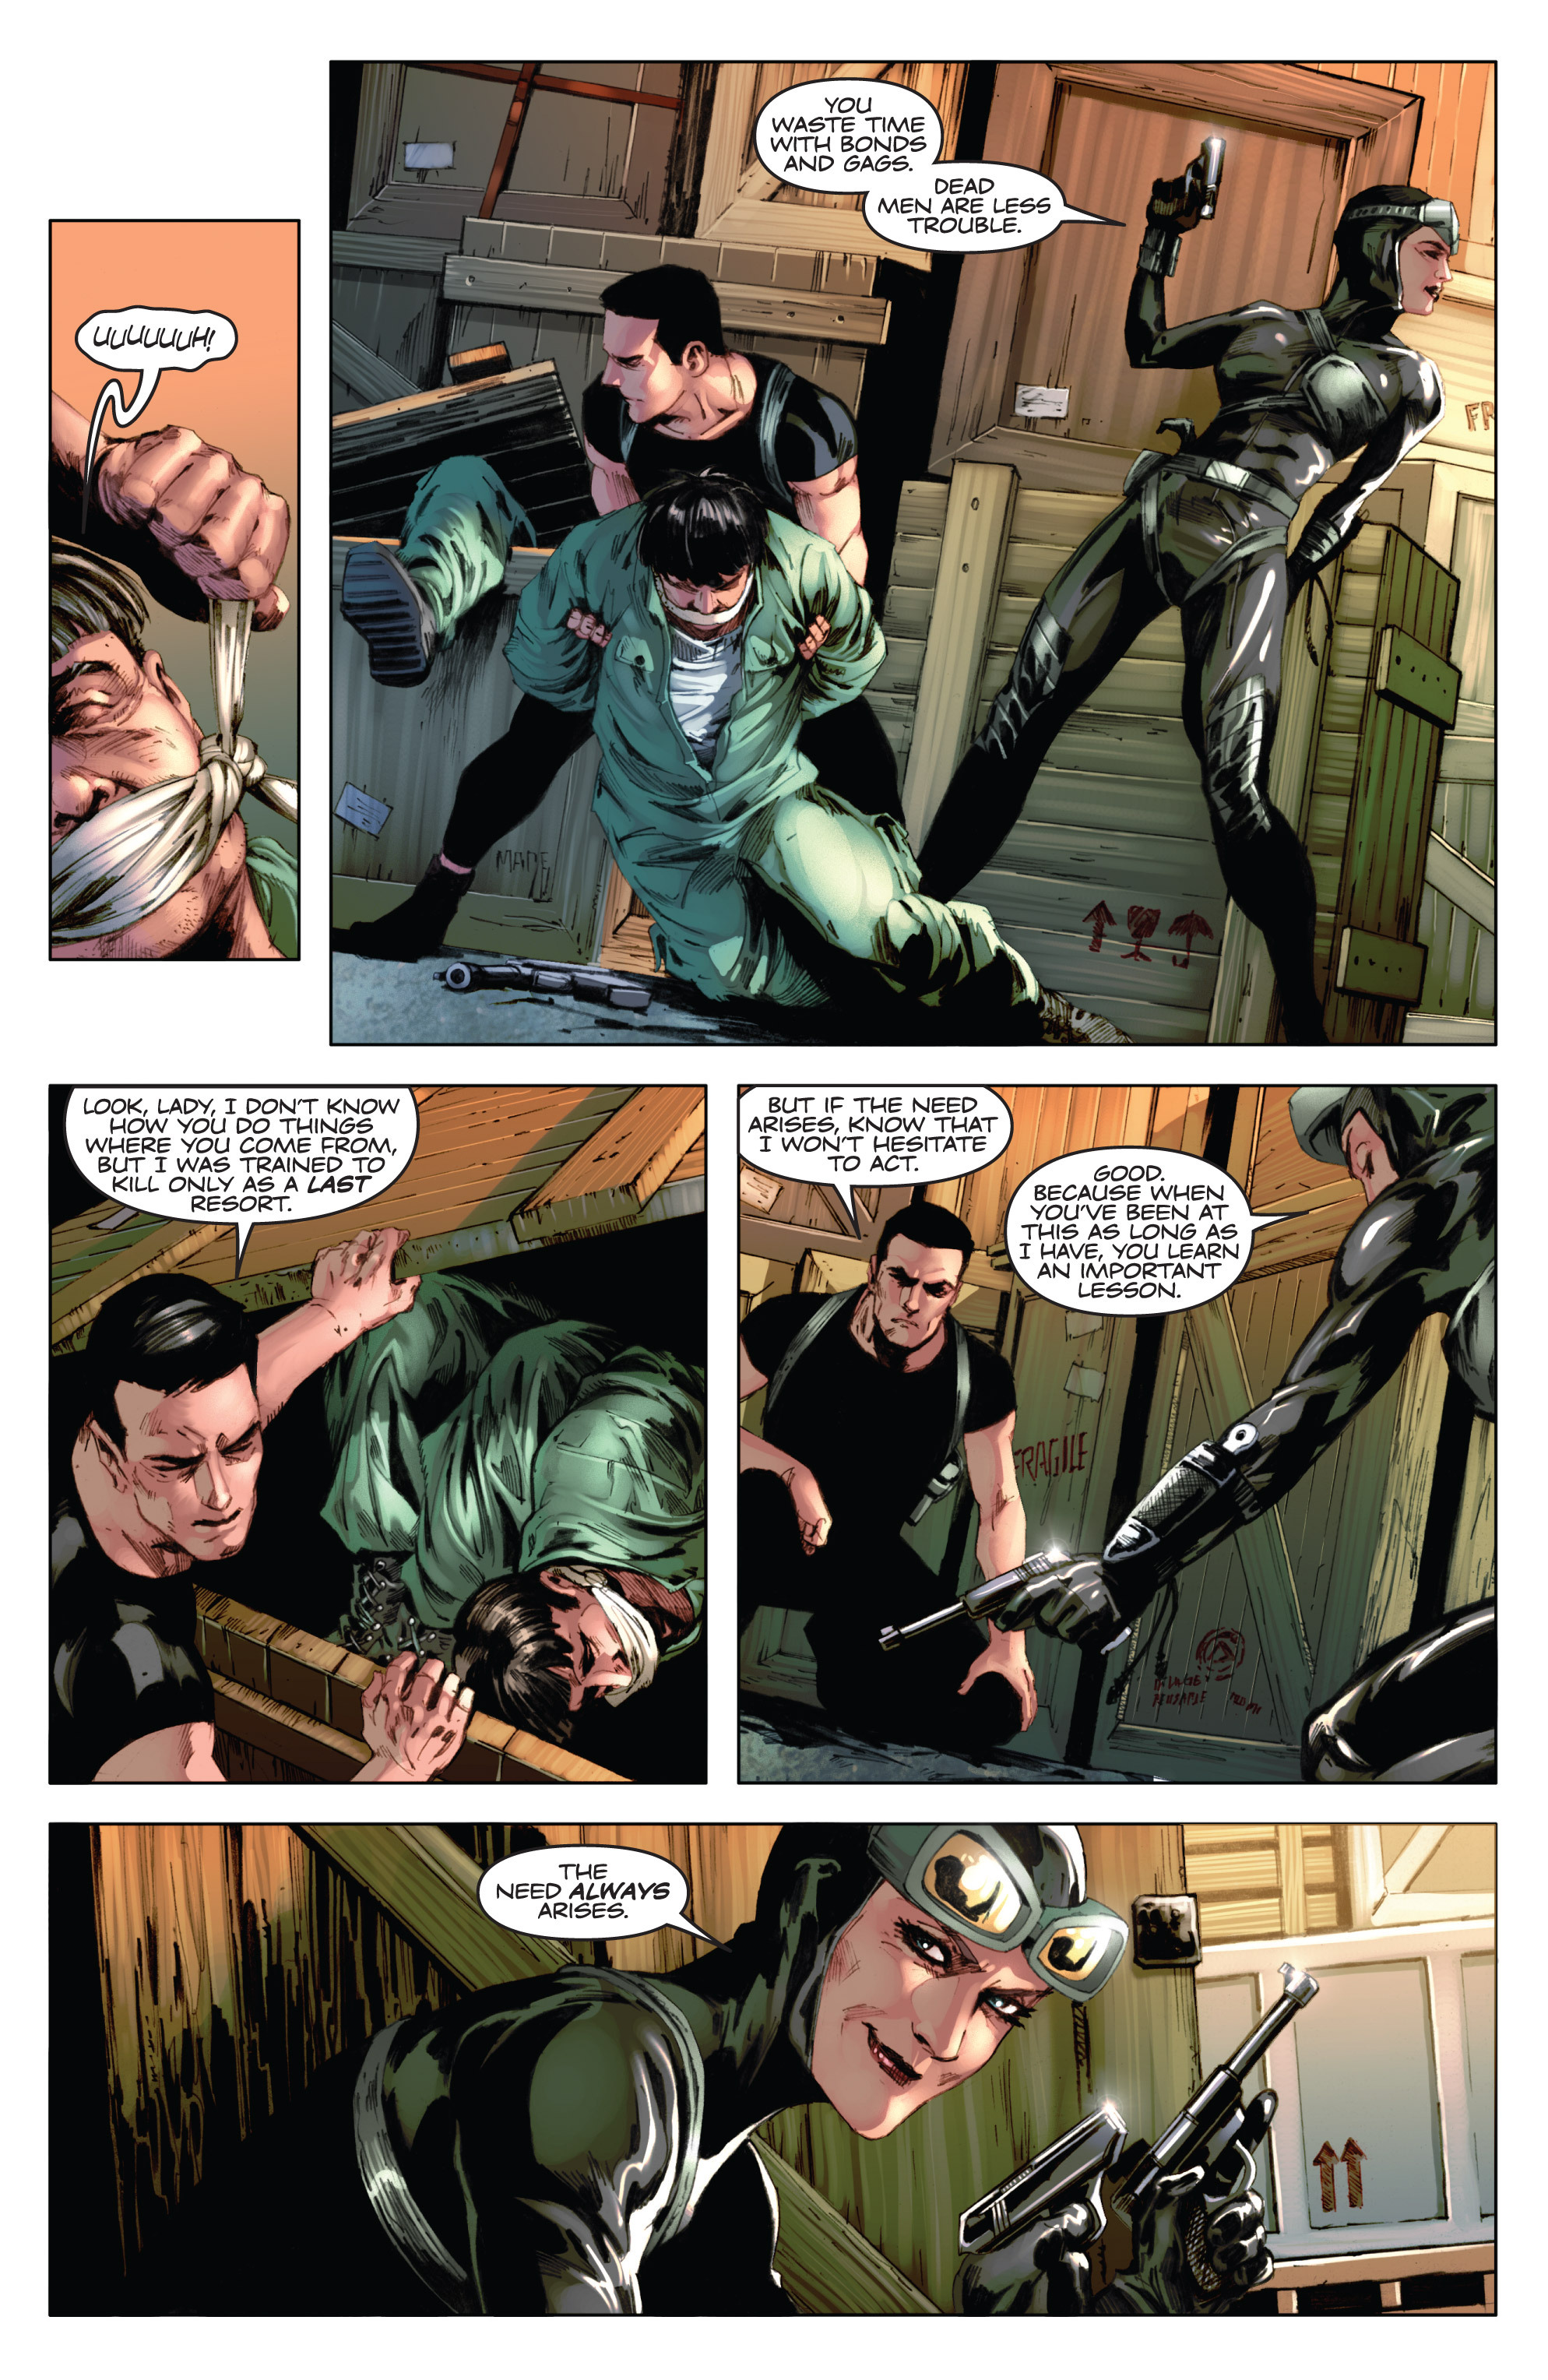 Read online Codename: Action comic -  Issue #4 - 8